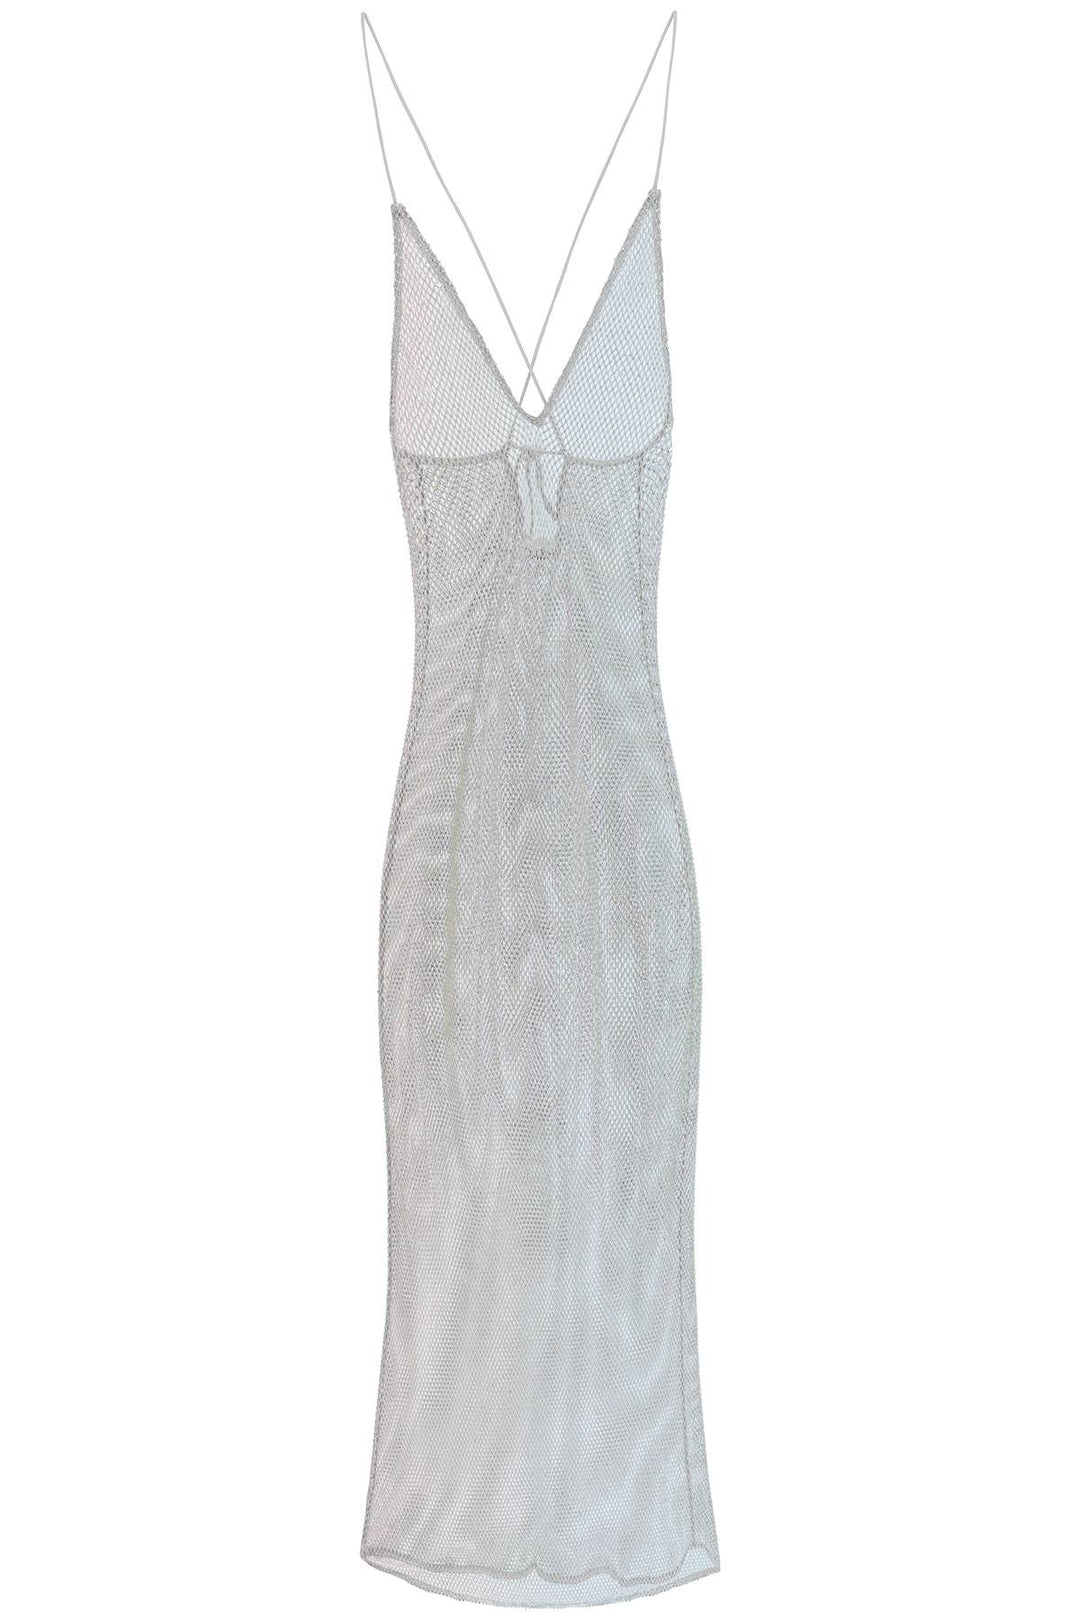 Ganni Long Mesh Dress With Crystals   Argento